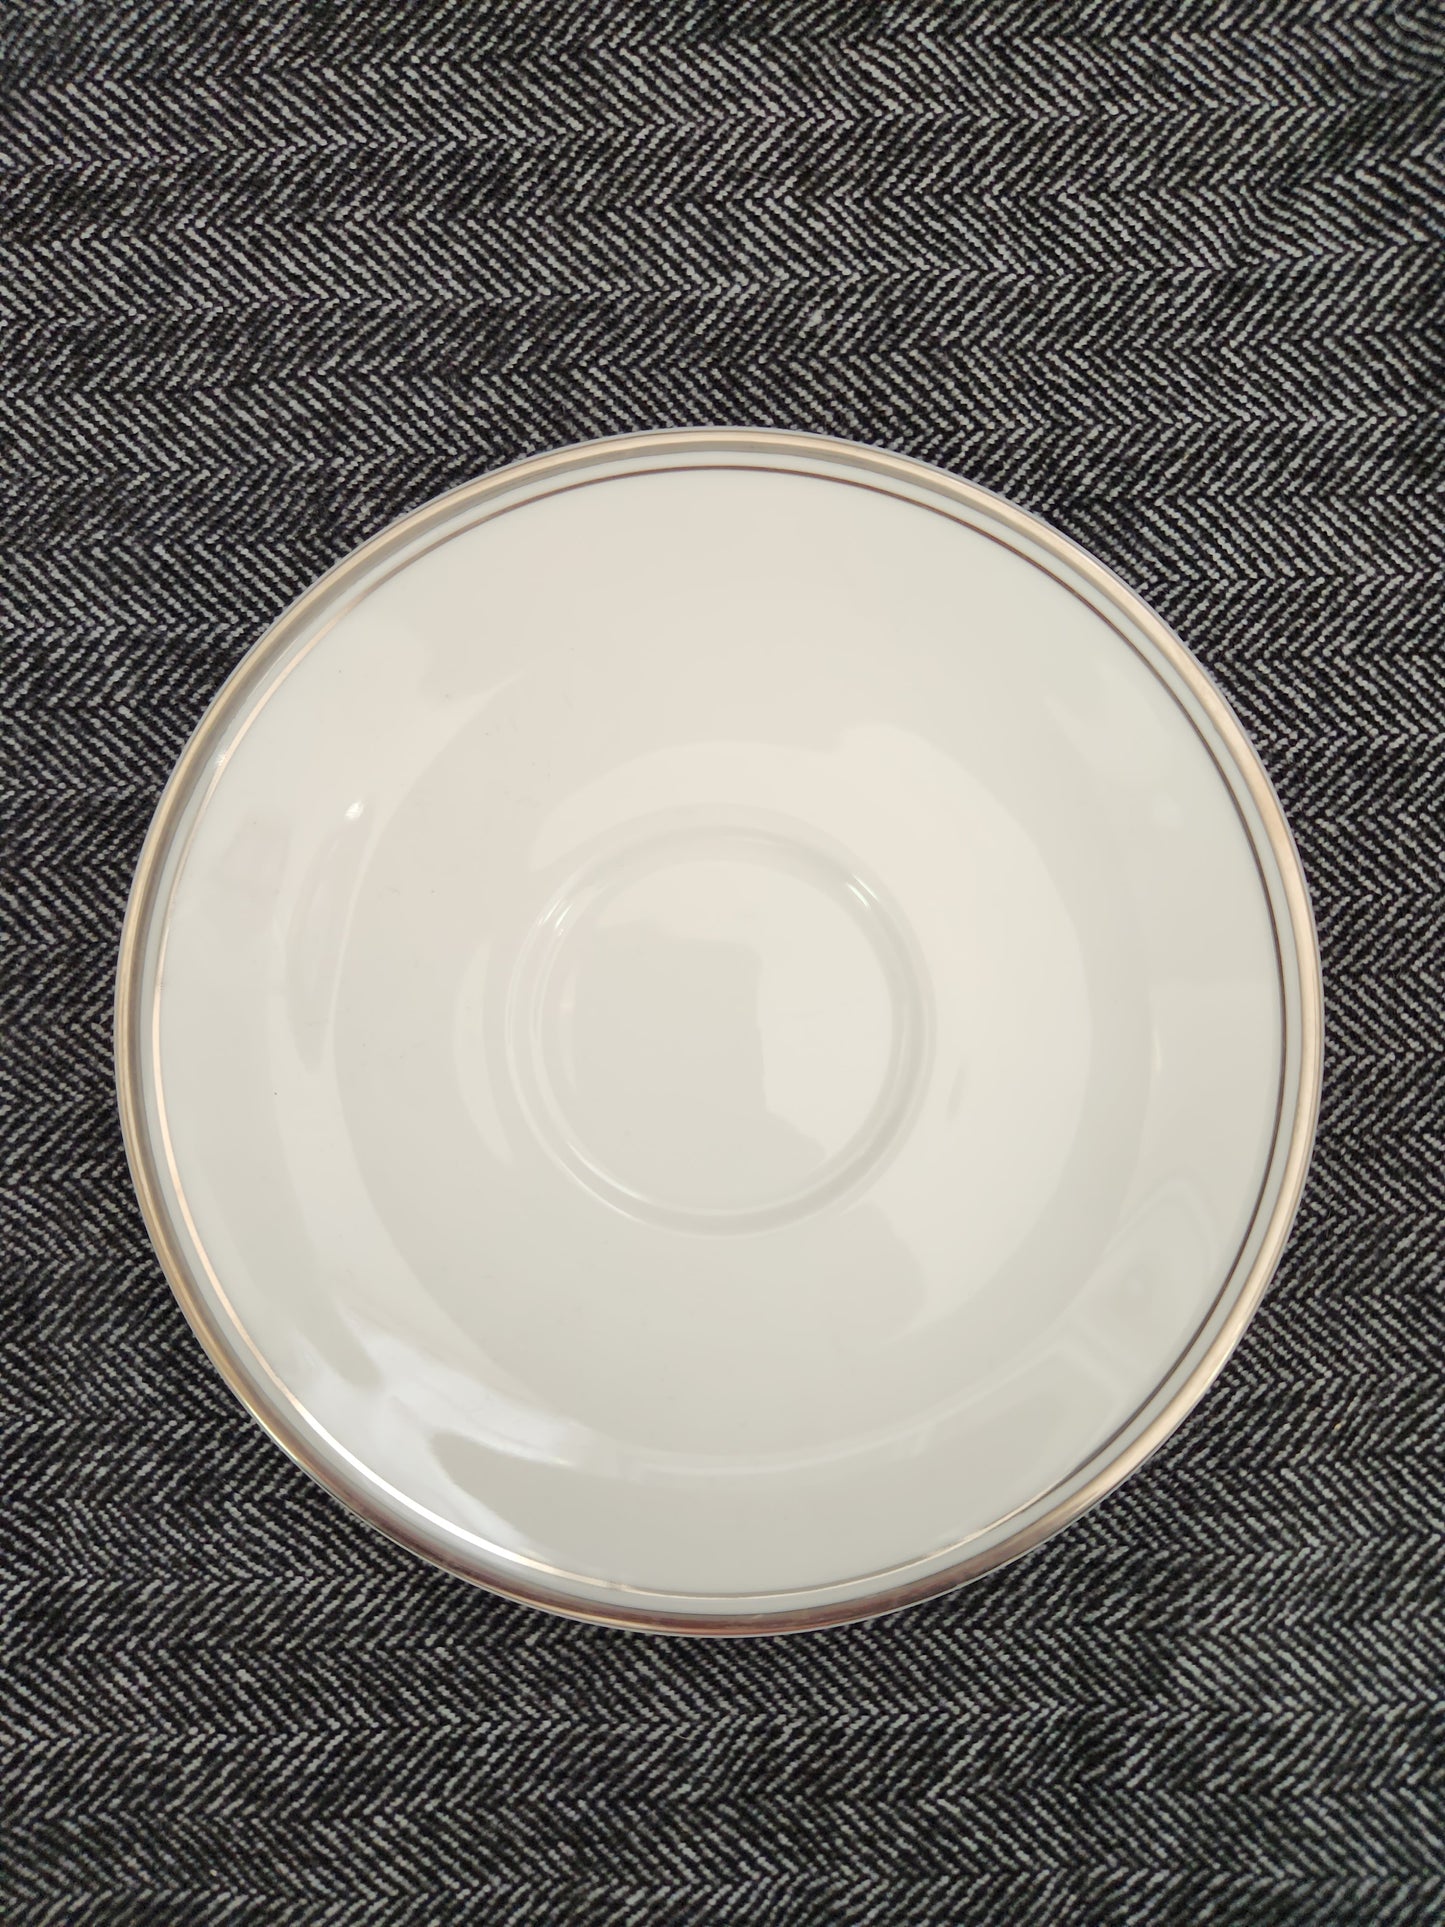 Concord Platinum 5-5/8" Saucer by Royal Doulton - #H5048